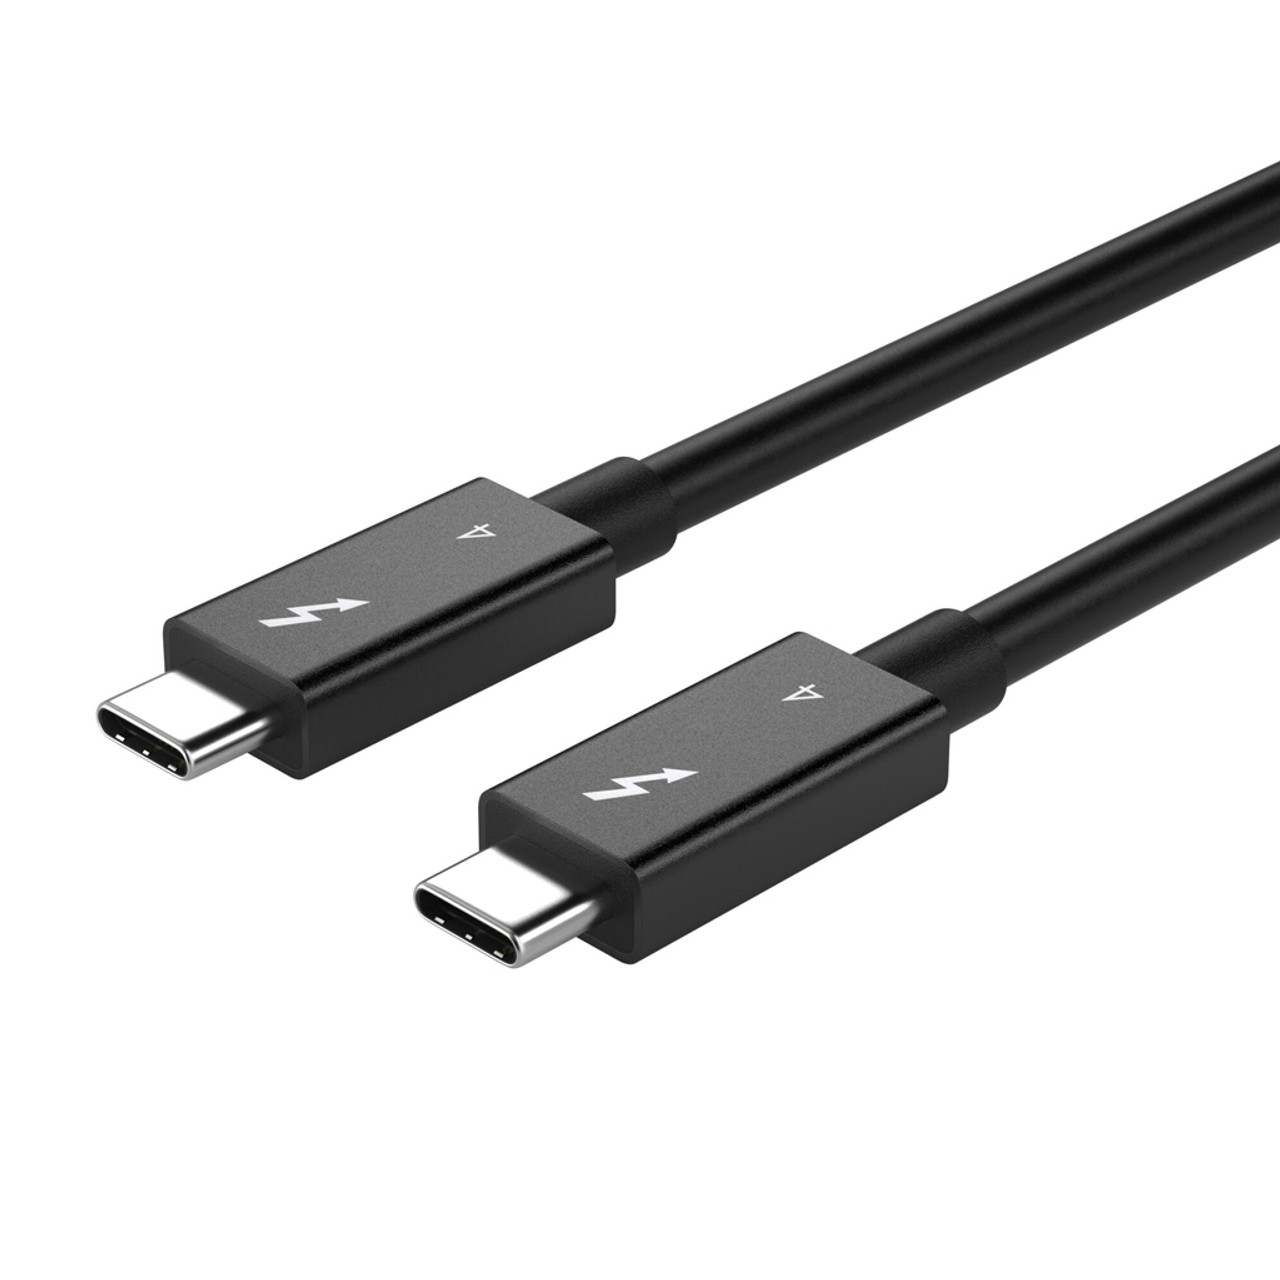 0.5M Thunderbolt 4 Cable 40G supports 8K@60Hz, 5A and 100W